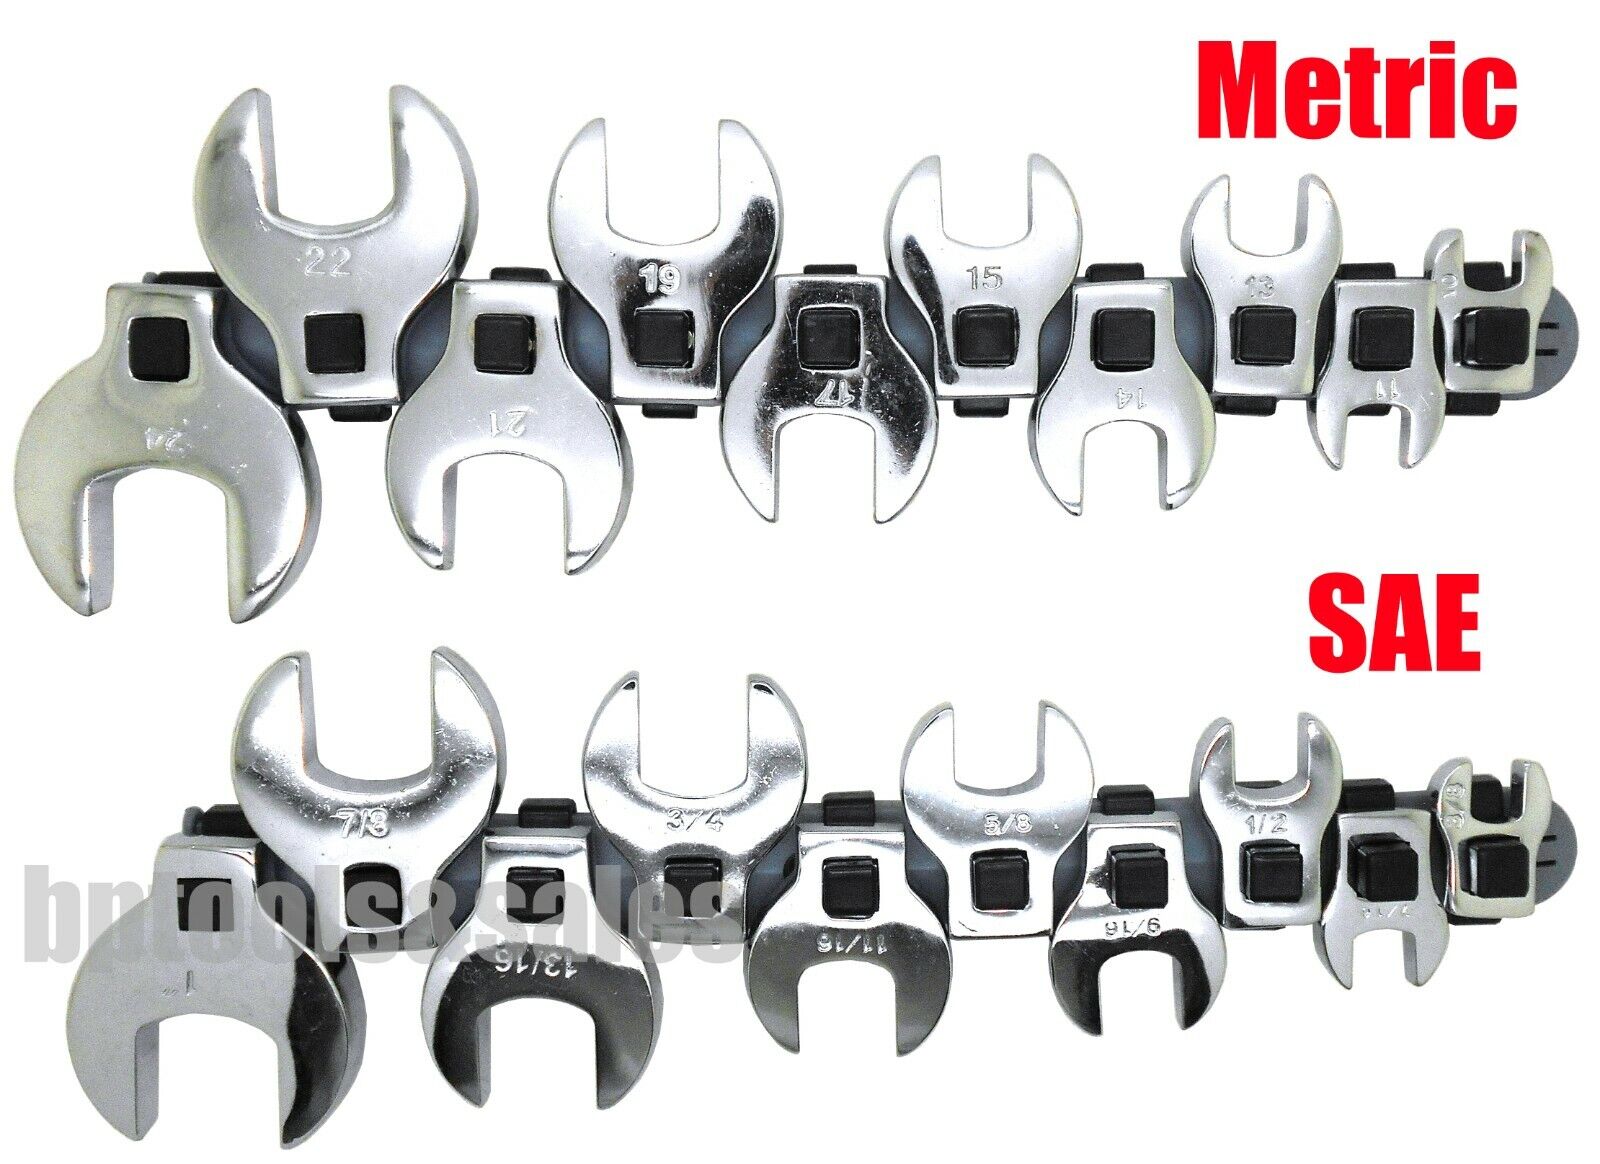 20pc 3/8" DRIVE CROWFOOT WRENCH SET WITH HOLDER (SAE & METRIC)